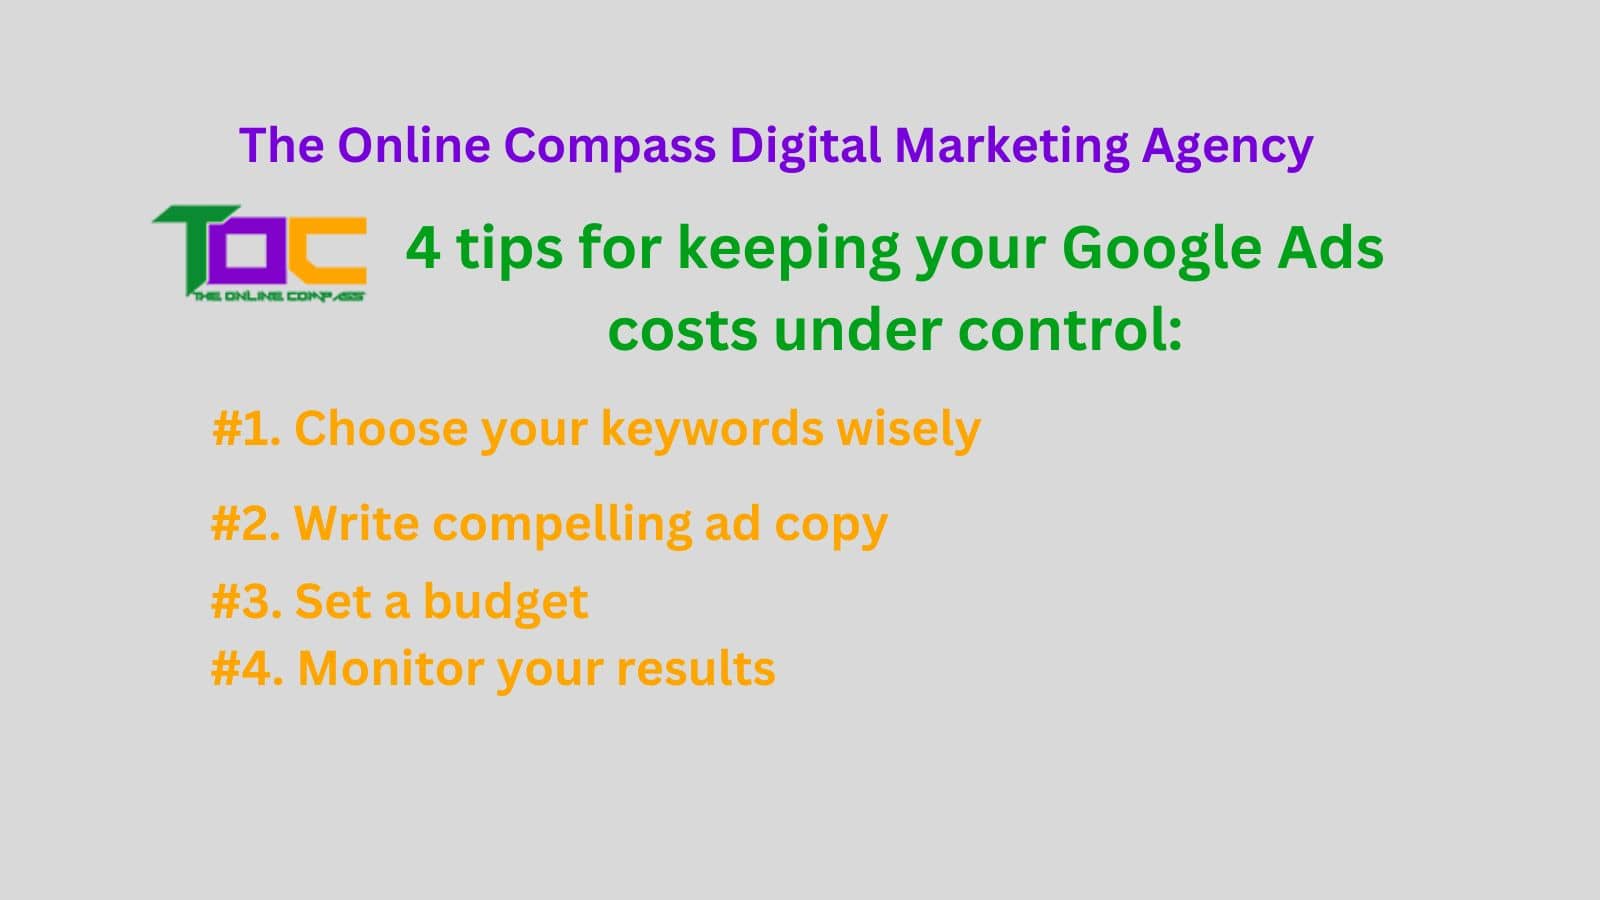 <br />
4 tips for keeping your Google Ads costs under control<br />
